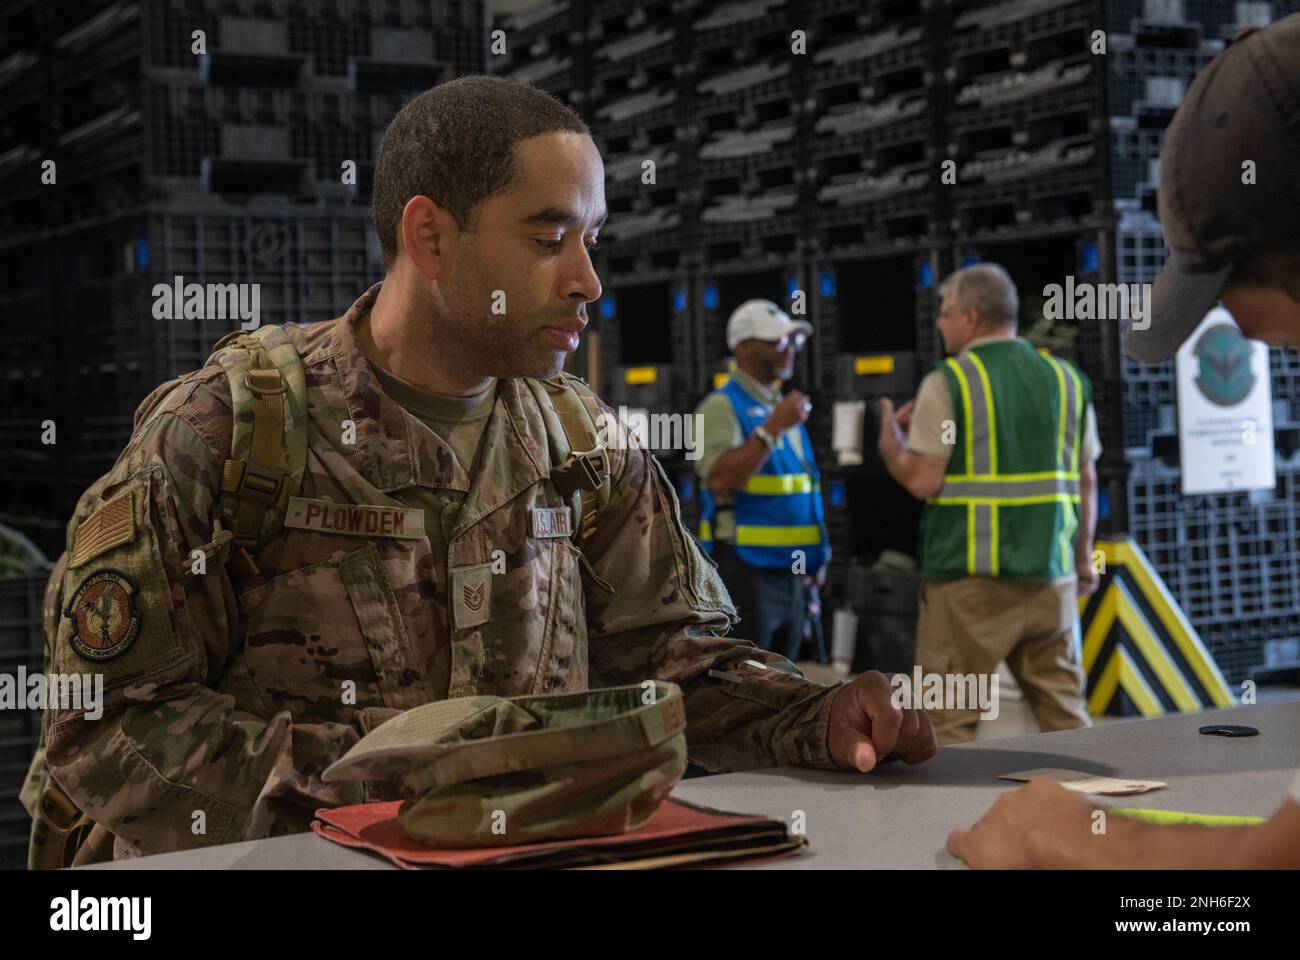 U.S. Air Force Technical Sgt. Dawayne Plowden, 375th Civil Engineering Squadron, waits in the Personnel Deployment Functional line on Scott Air Force Base, Illinois, July 20, 2022. Plowden was chosen to participate in a deployment rehearsal with the goal of being ready to execute rapid global mobility. Stock Photo